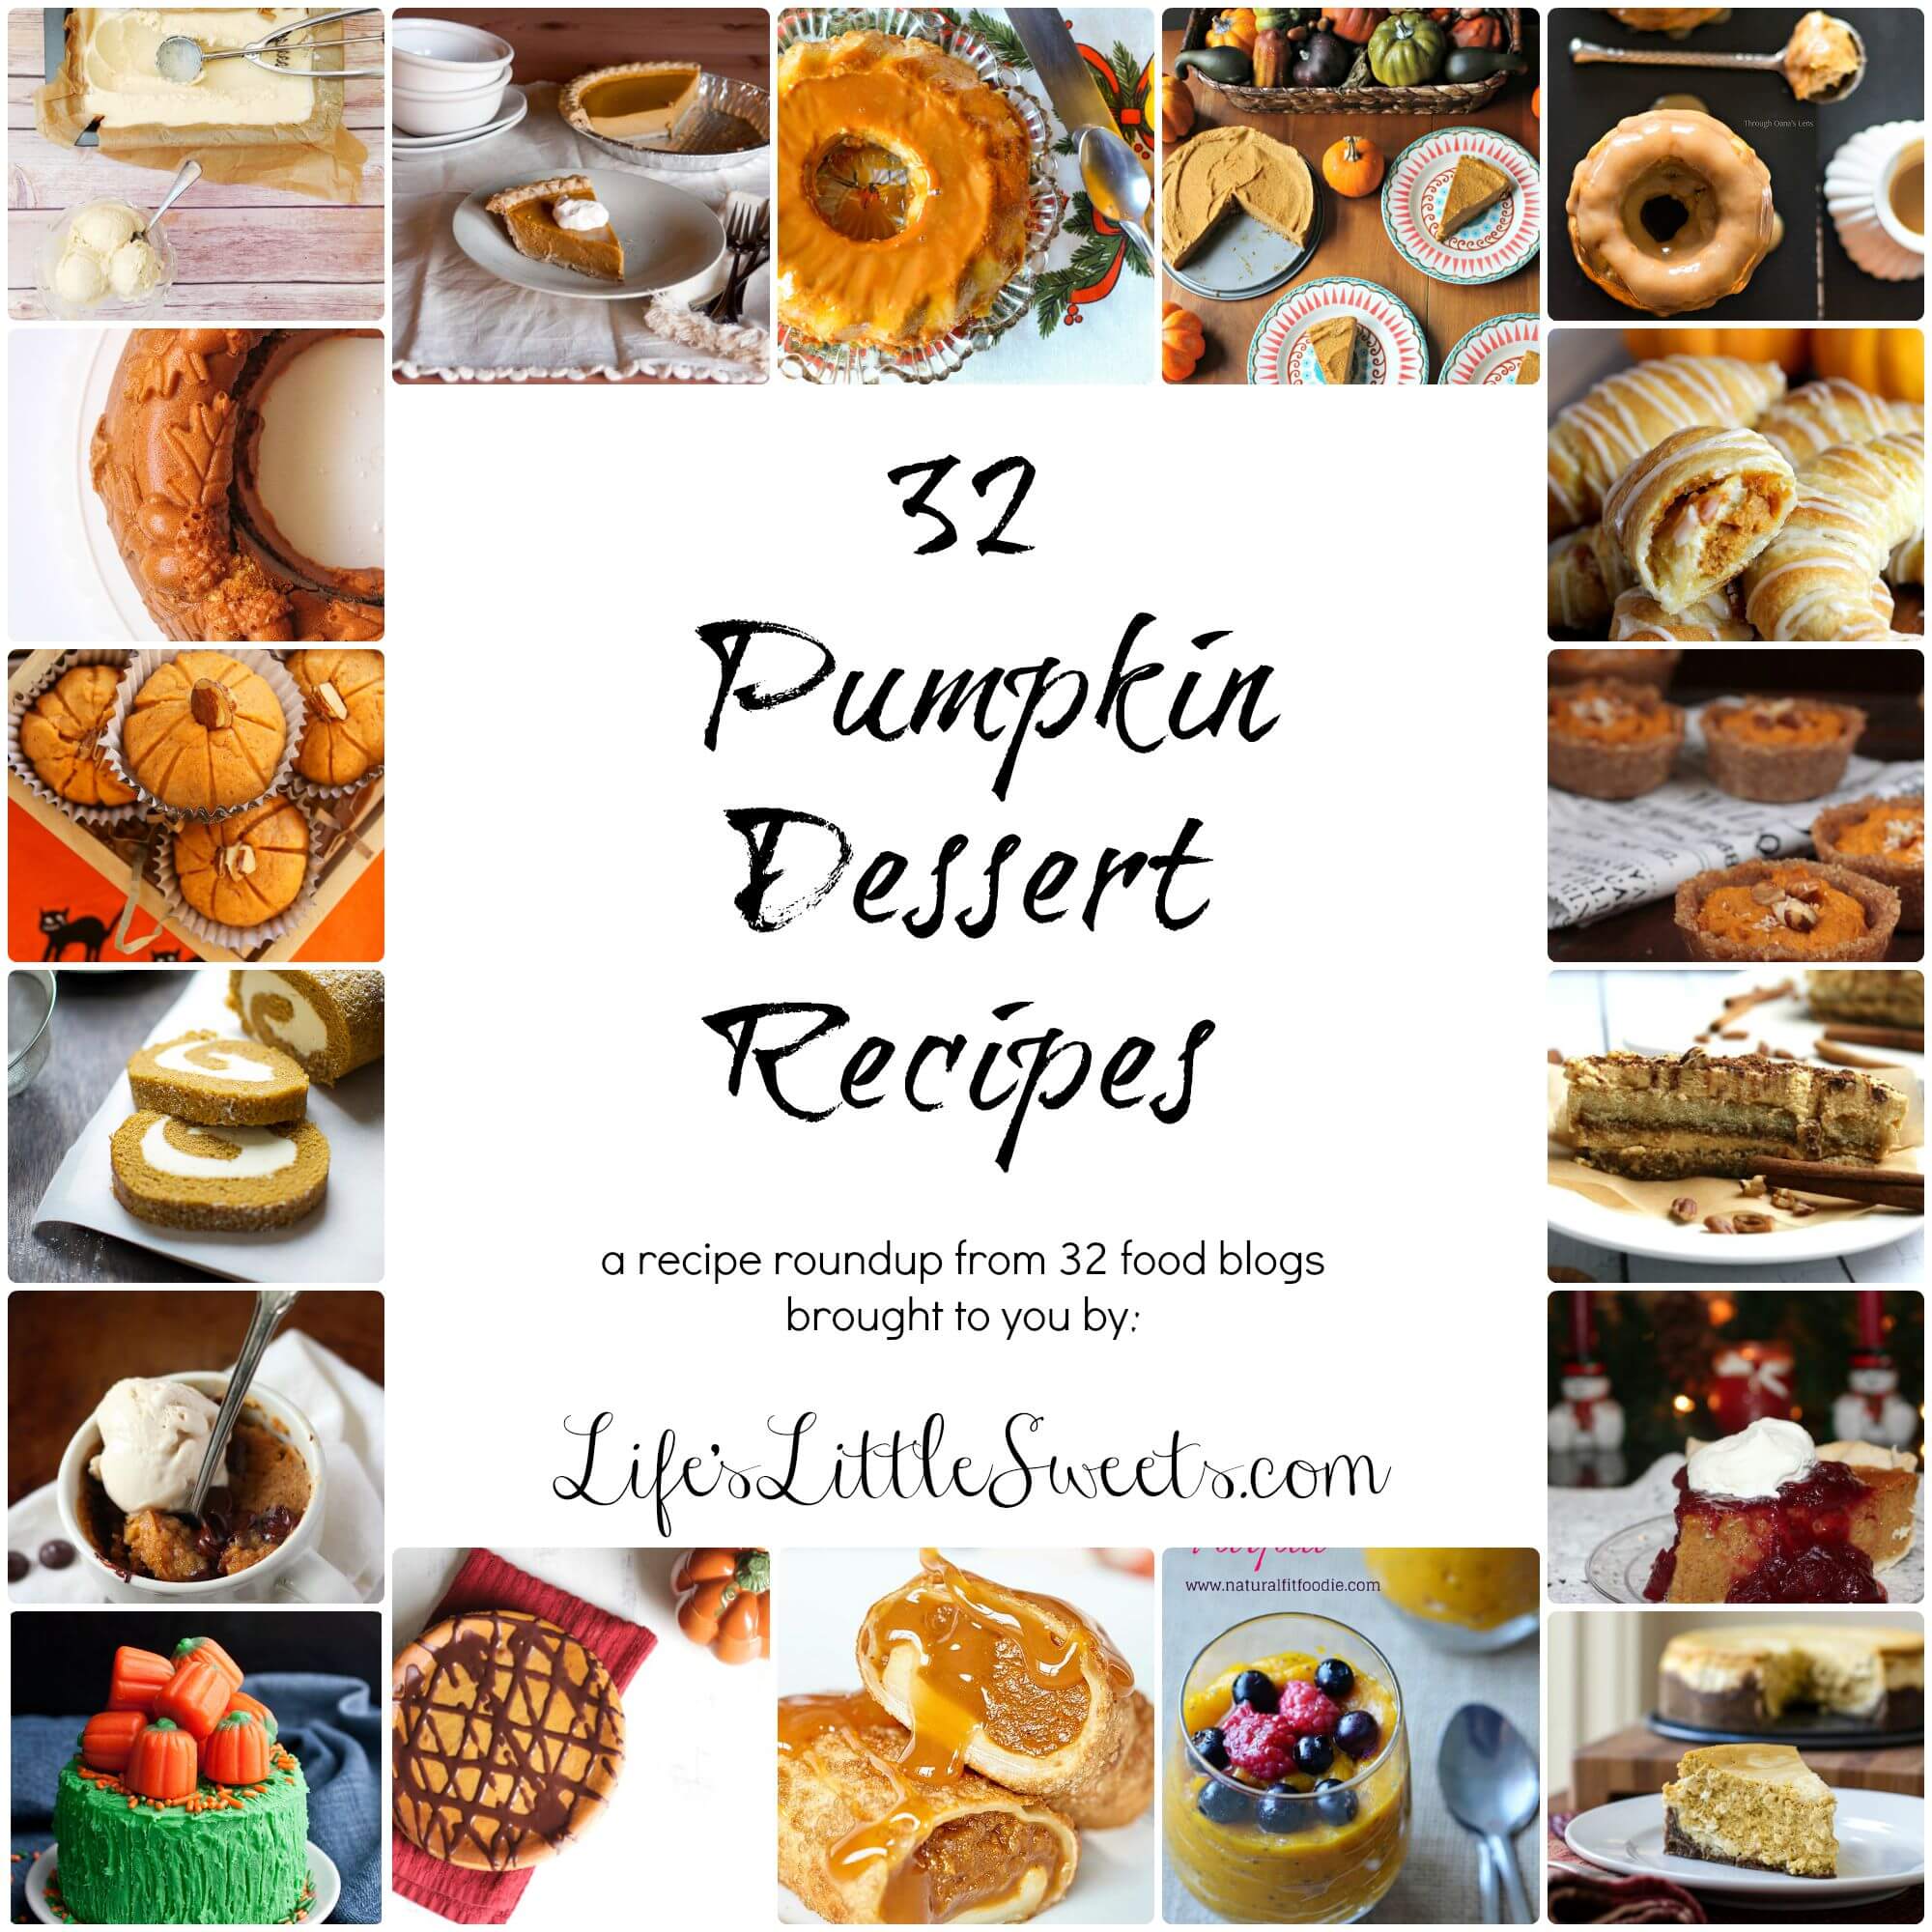 I’m sharing an ecstatic array of pumpkin dessert recipes to dazzle and delight and get those creative juices flowing in the kitchen – pumpkin-wise of course! Any one of these could be a real winner after dinner and or a holiday gathering.